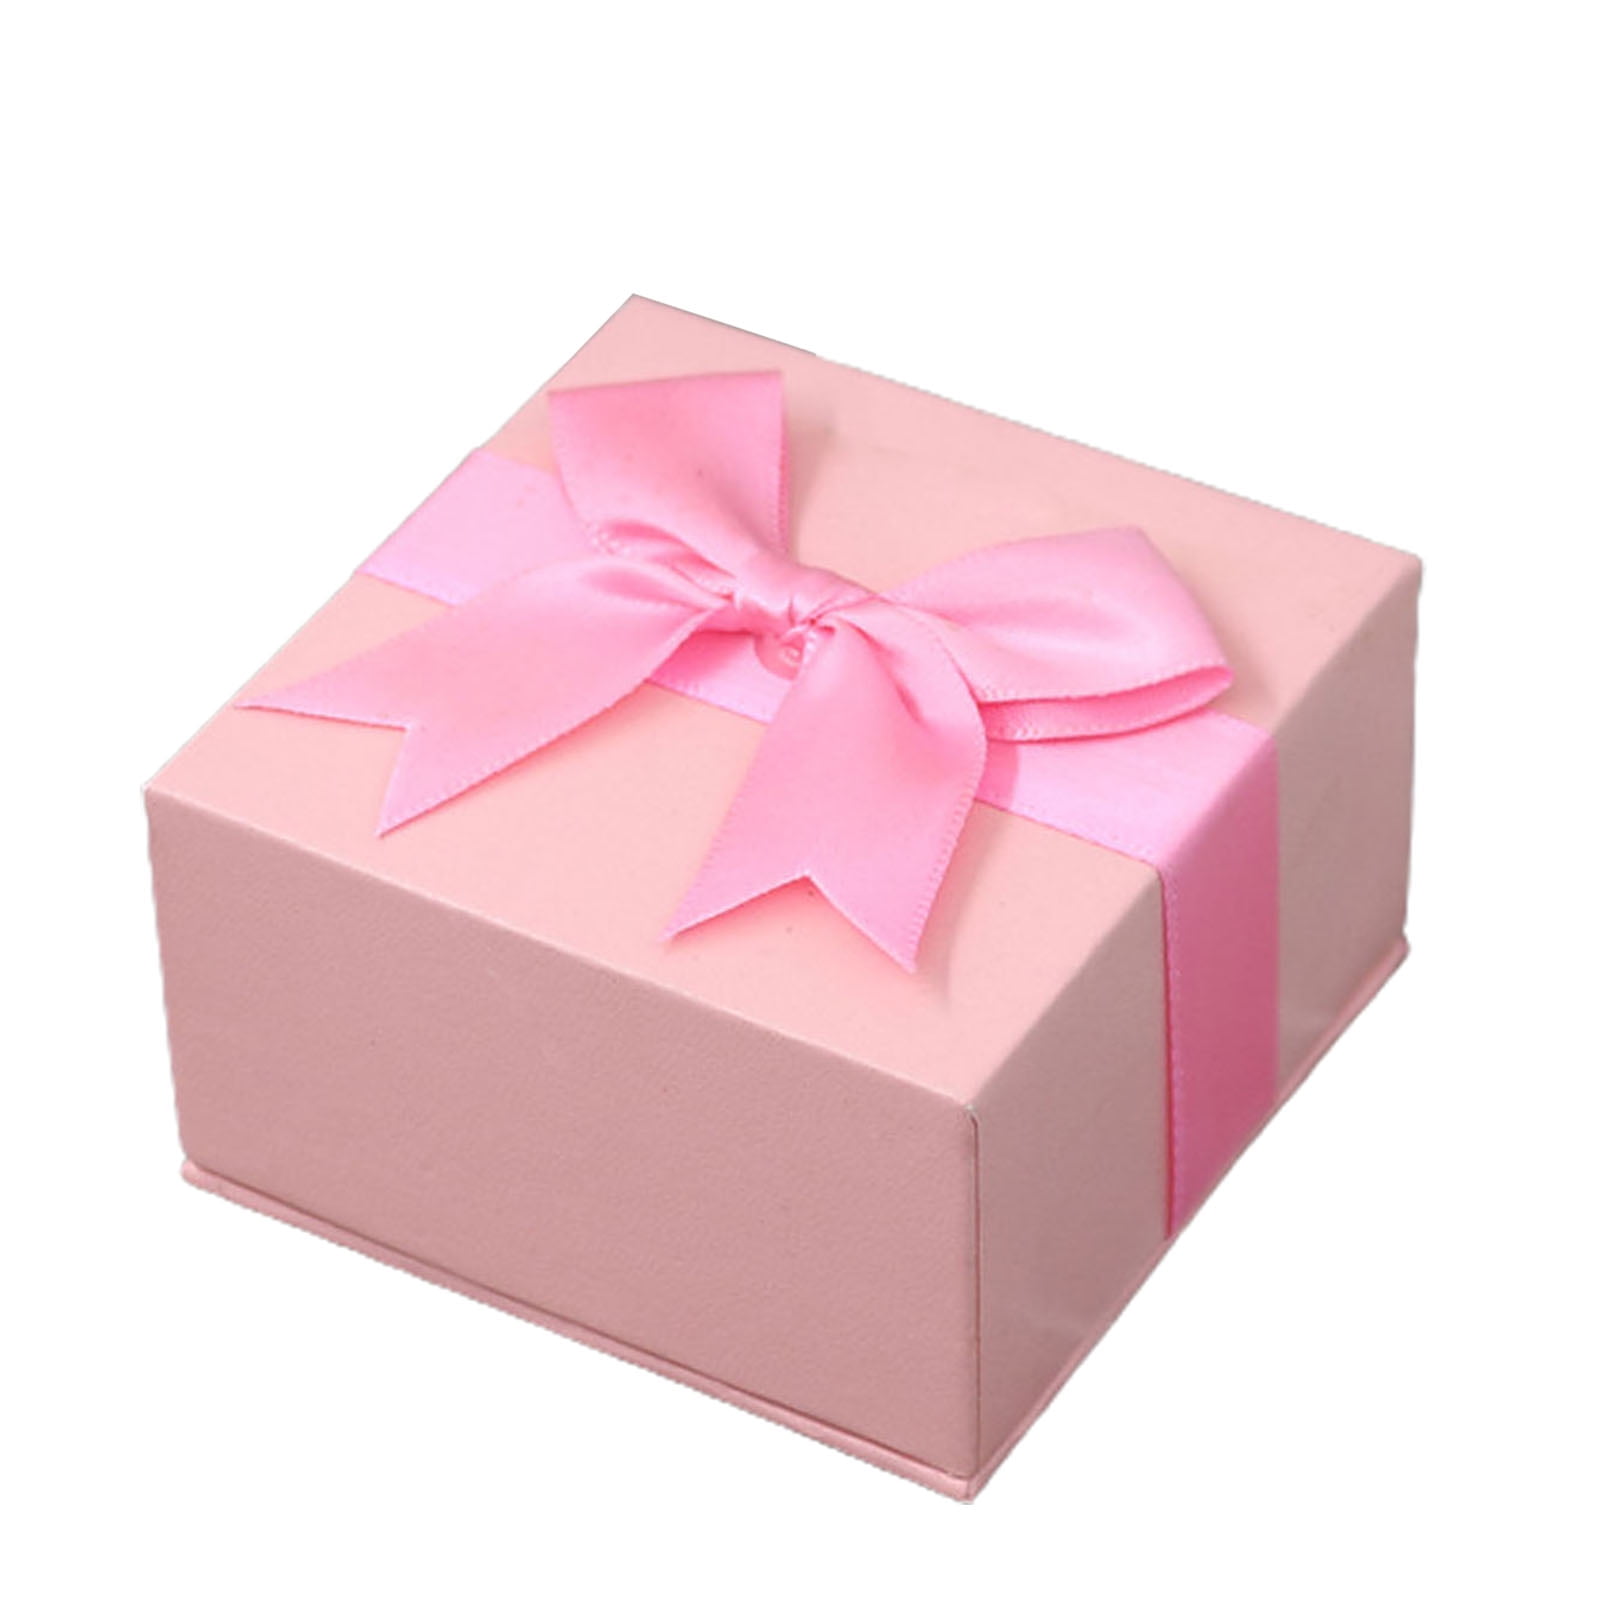 JEWELLERY GIFT BOX RIBBON BOW For RING NECKLACE BRACELET BOXES EARRINGS X3B6